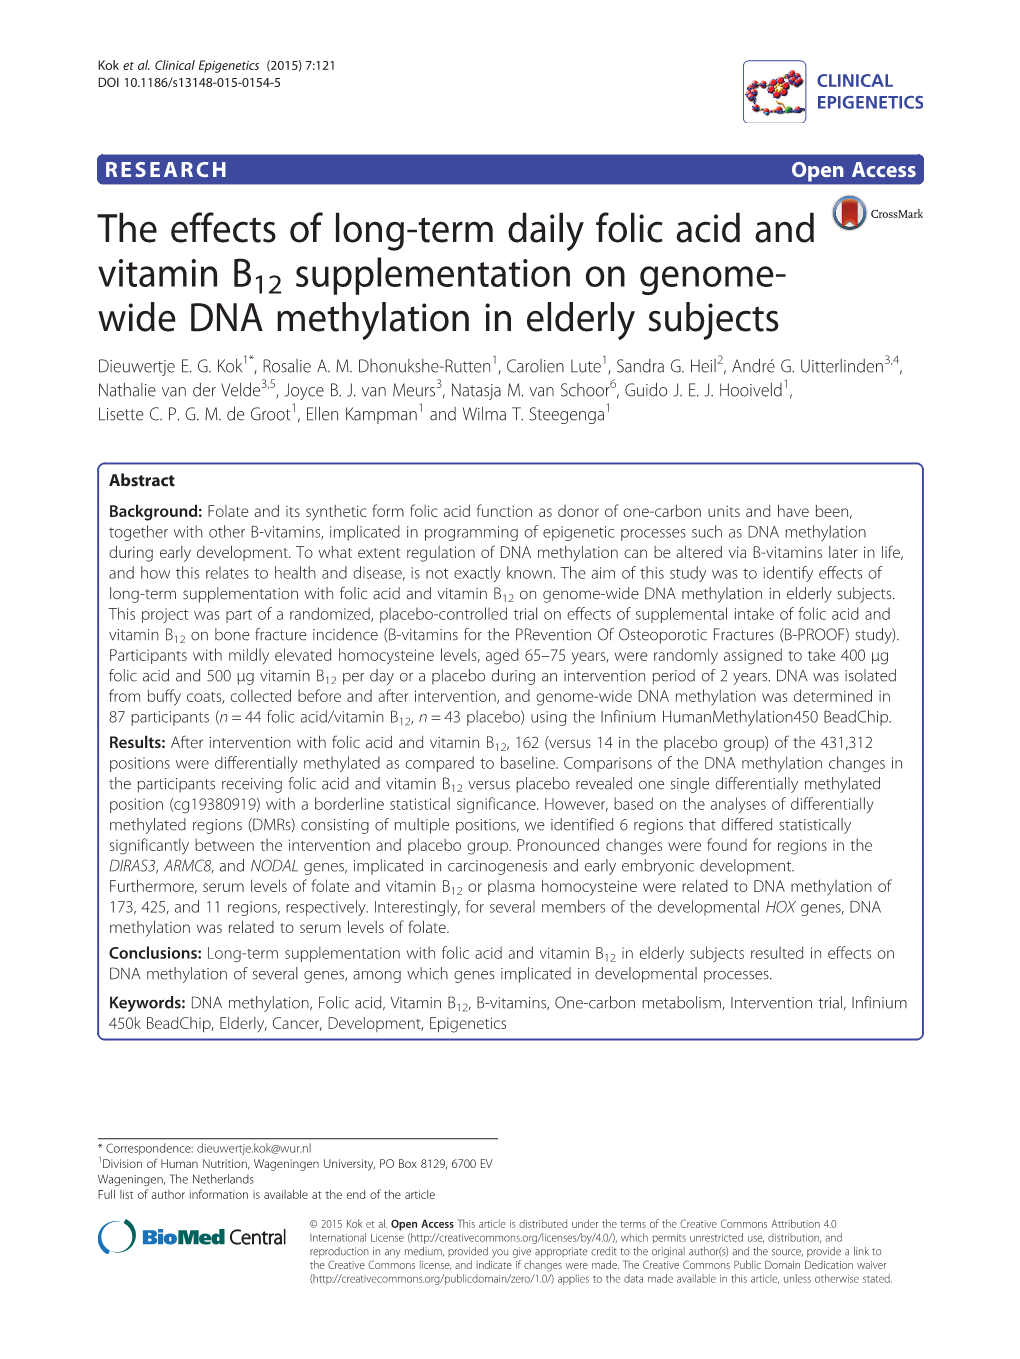 The Effects of Long-Term Daily Folic Acid and Vitamin B12 Supplementation on Genome- Wide DNA Methylation in Elderly Subjects Dieuwertje E